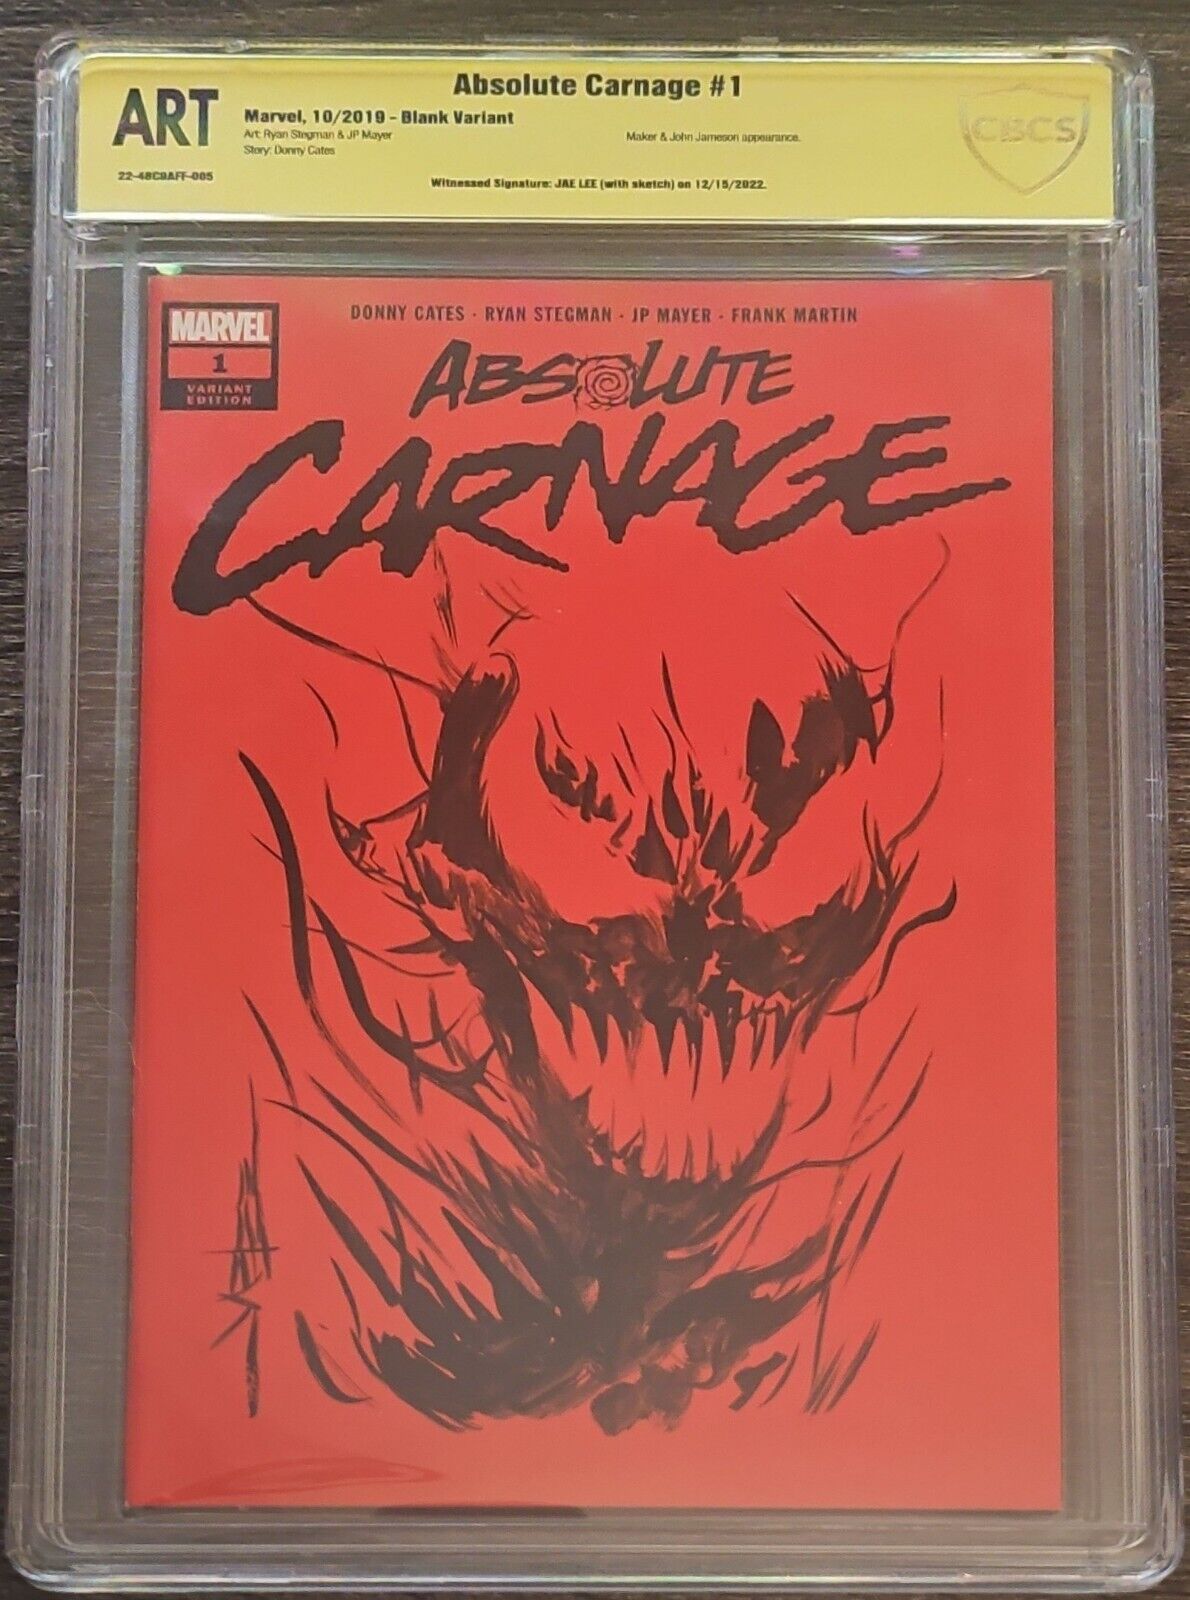 ABSOLUTE CARNAGE 1 RED BLANK VARIANT - CBCS FULL ART JAE LEE W/ AUTO NOT CGC 9.8